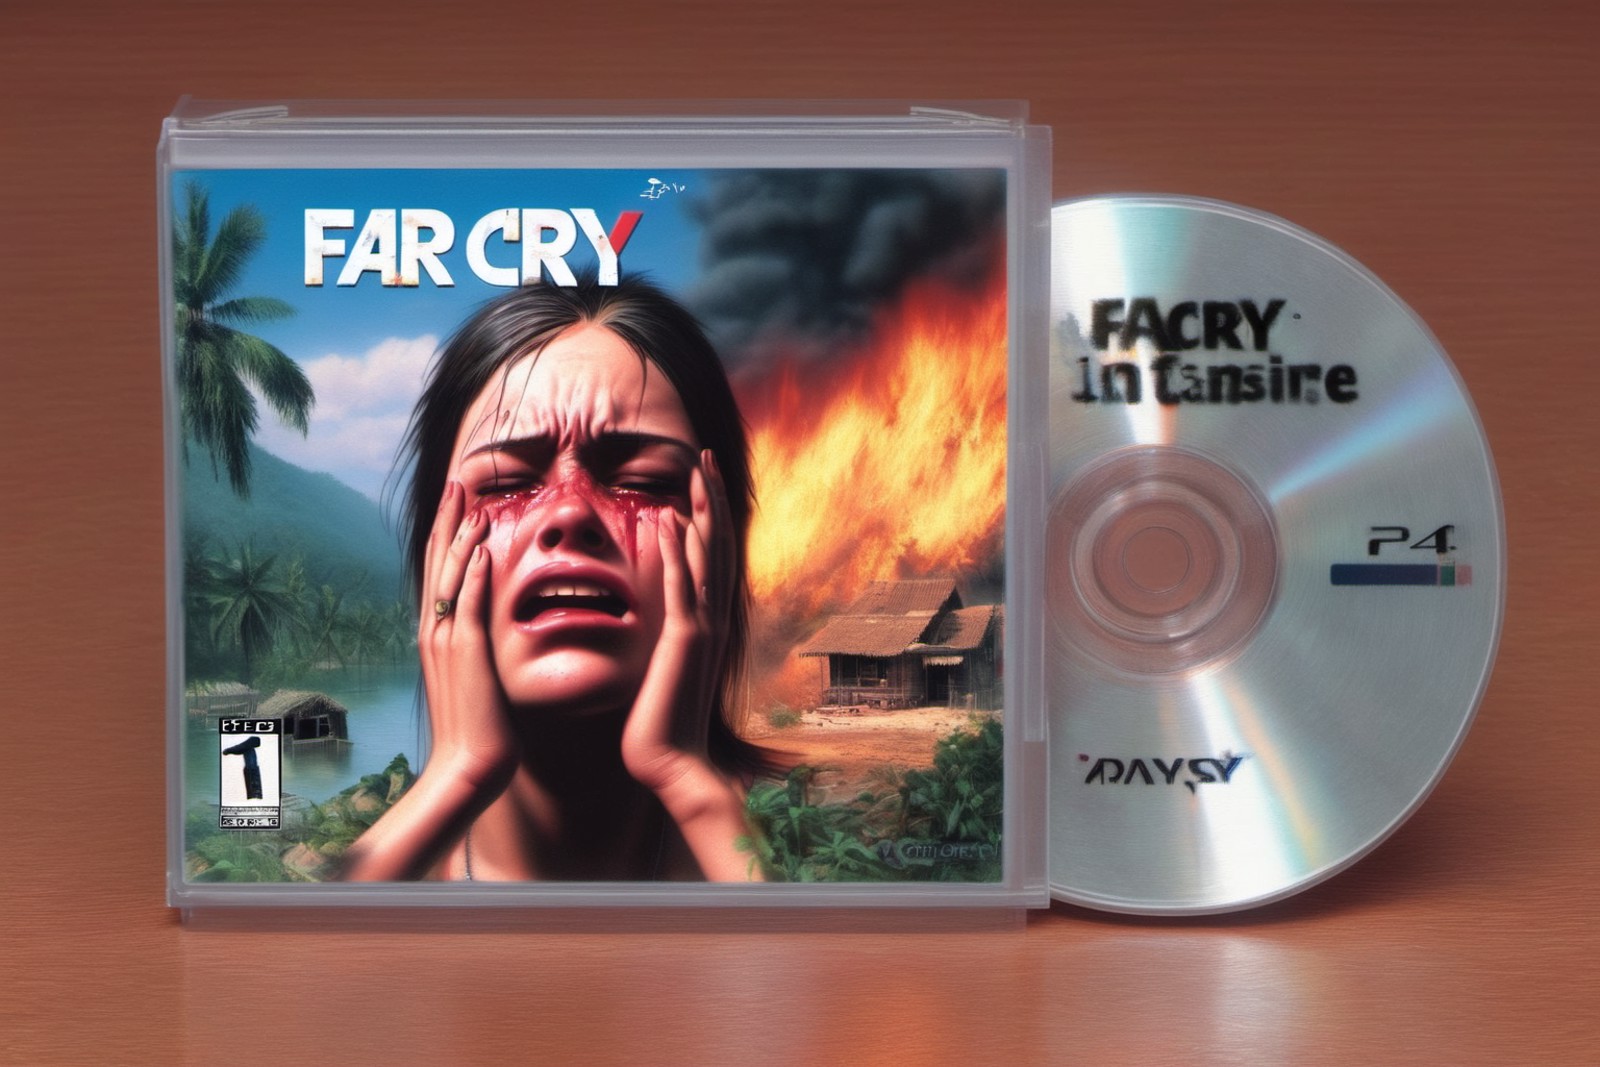 a hyper realistic picture of a PlayStation one jewel case CD cover of the game "Far Cry", we see a girl crying on the cove...